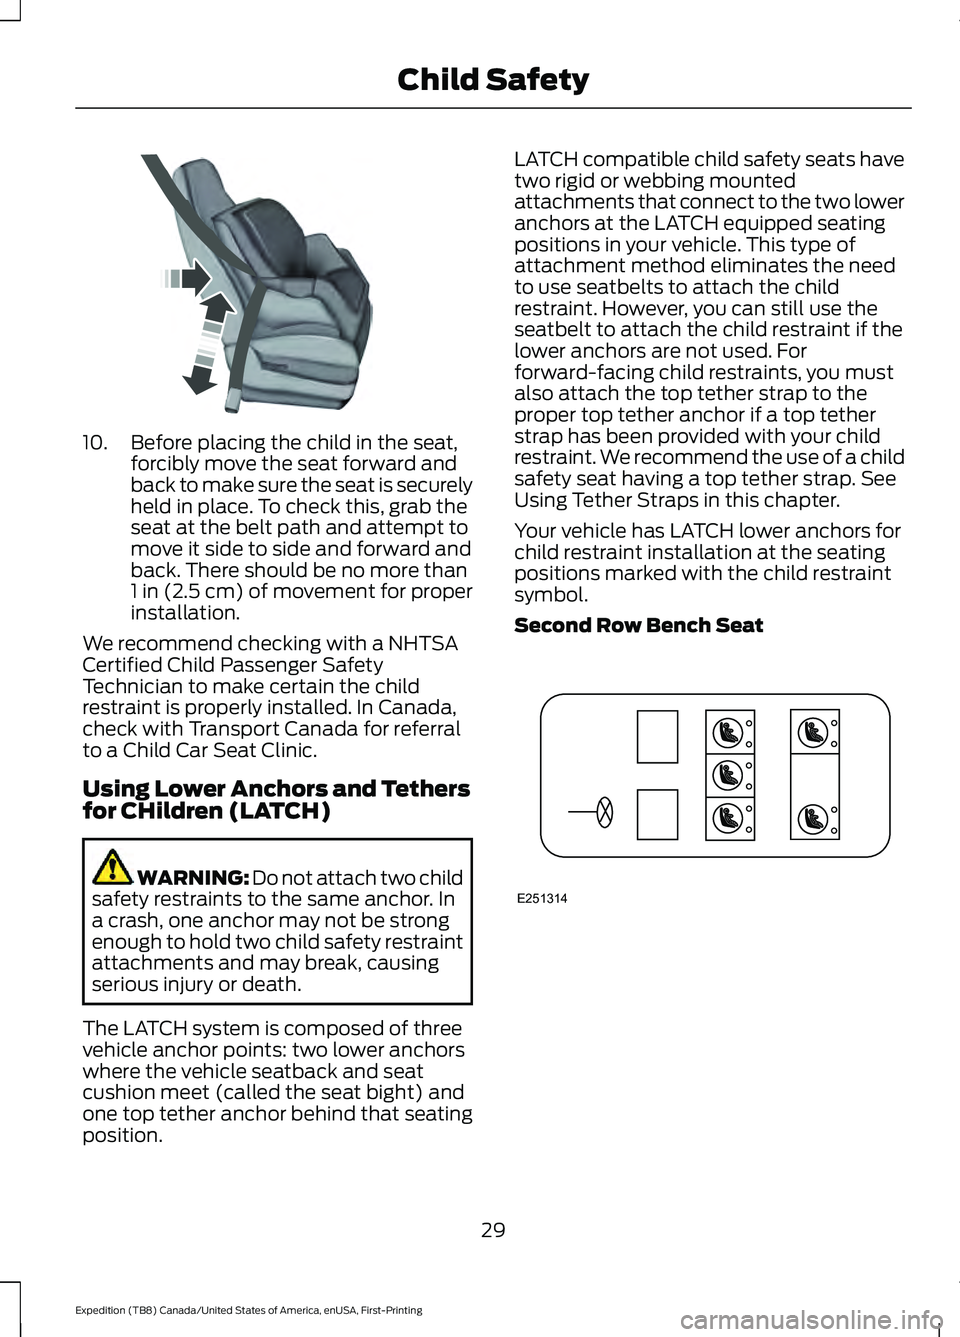 FORD EXPEDITION 2021  Owners Manual 10. Before placing the child in the seat,
forcibly move the seat forward and
back to make sure the seat is securely
held in place. To check this, grab the
seat at the belt path and attempt to
move it 